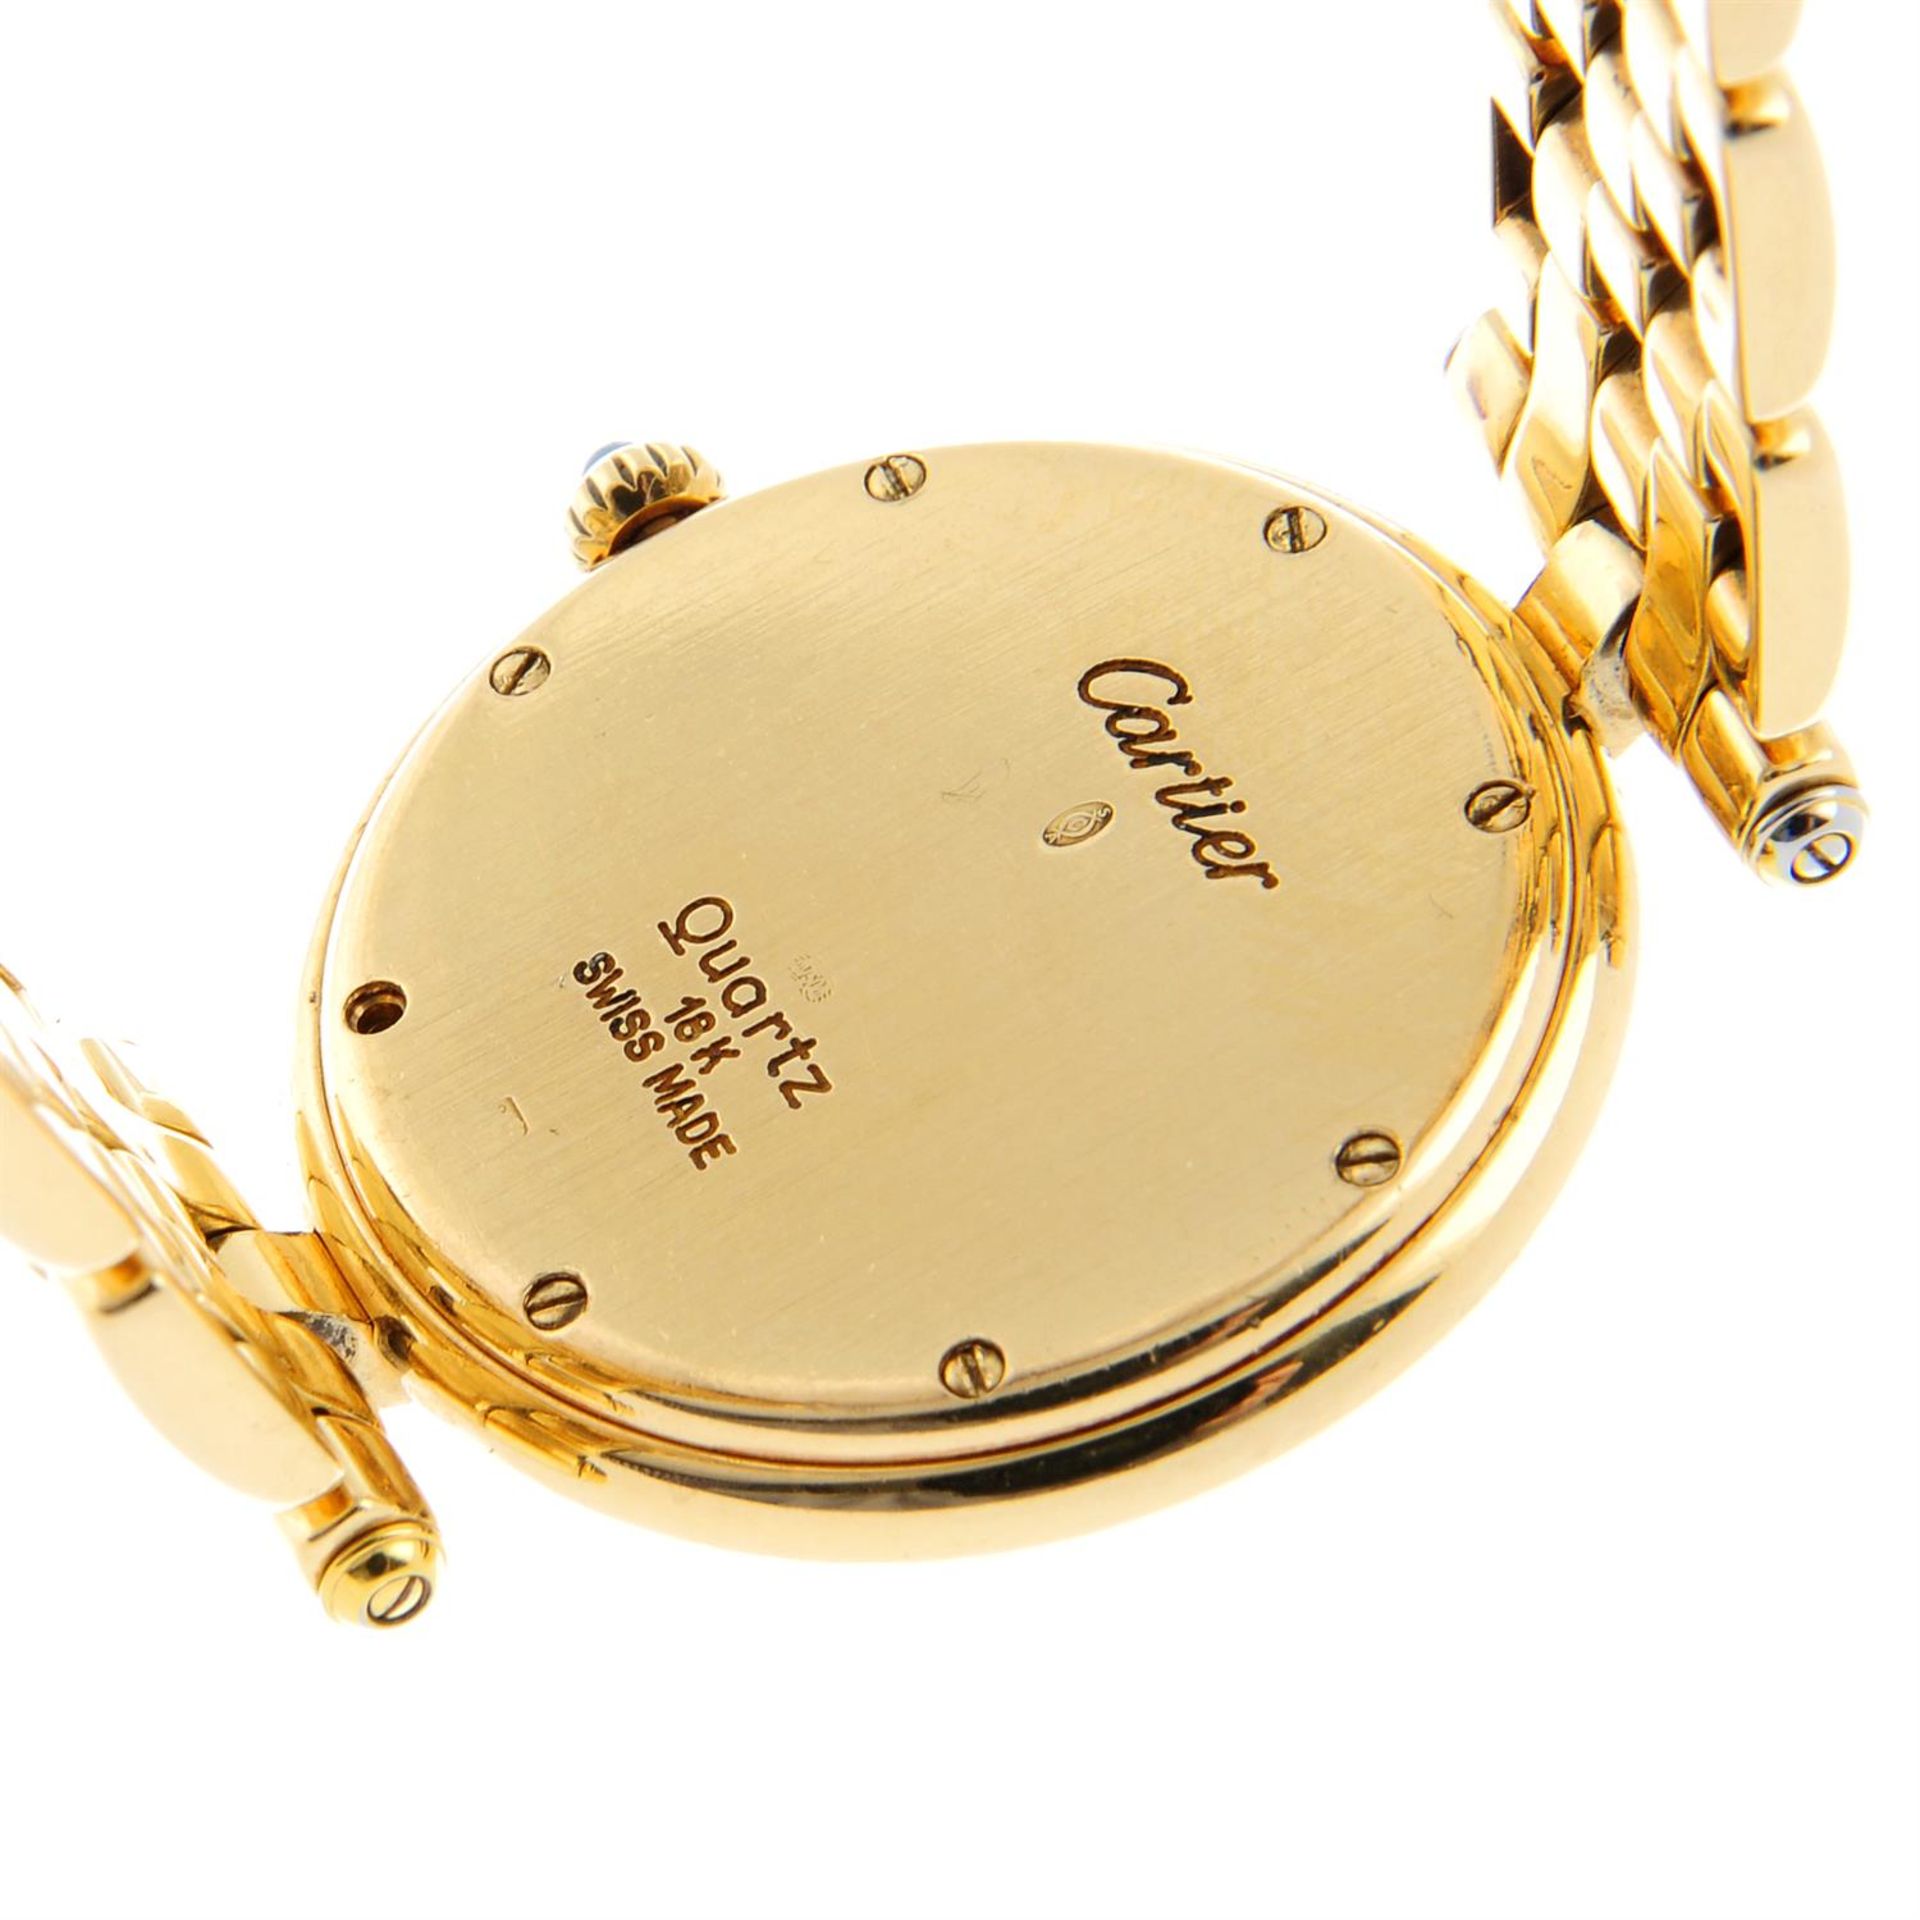 CARTIER - a 18ct gold Panthere Vendome bracelet watch, 24mm. - Image 5 of 6